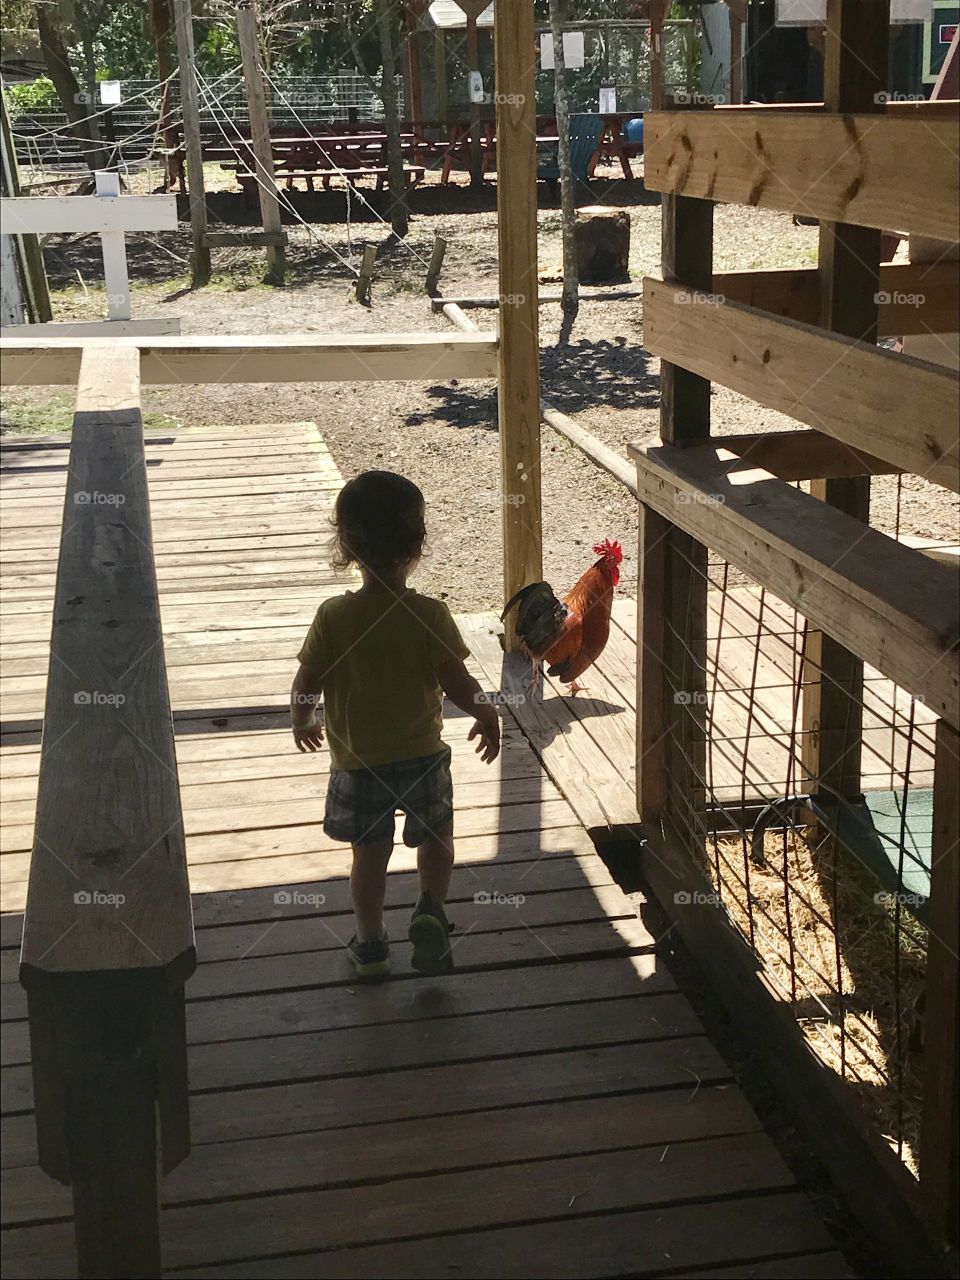 Chasing roosters